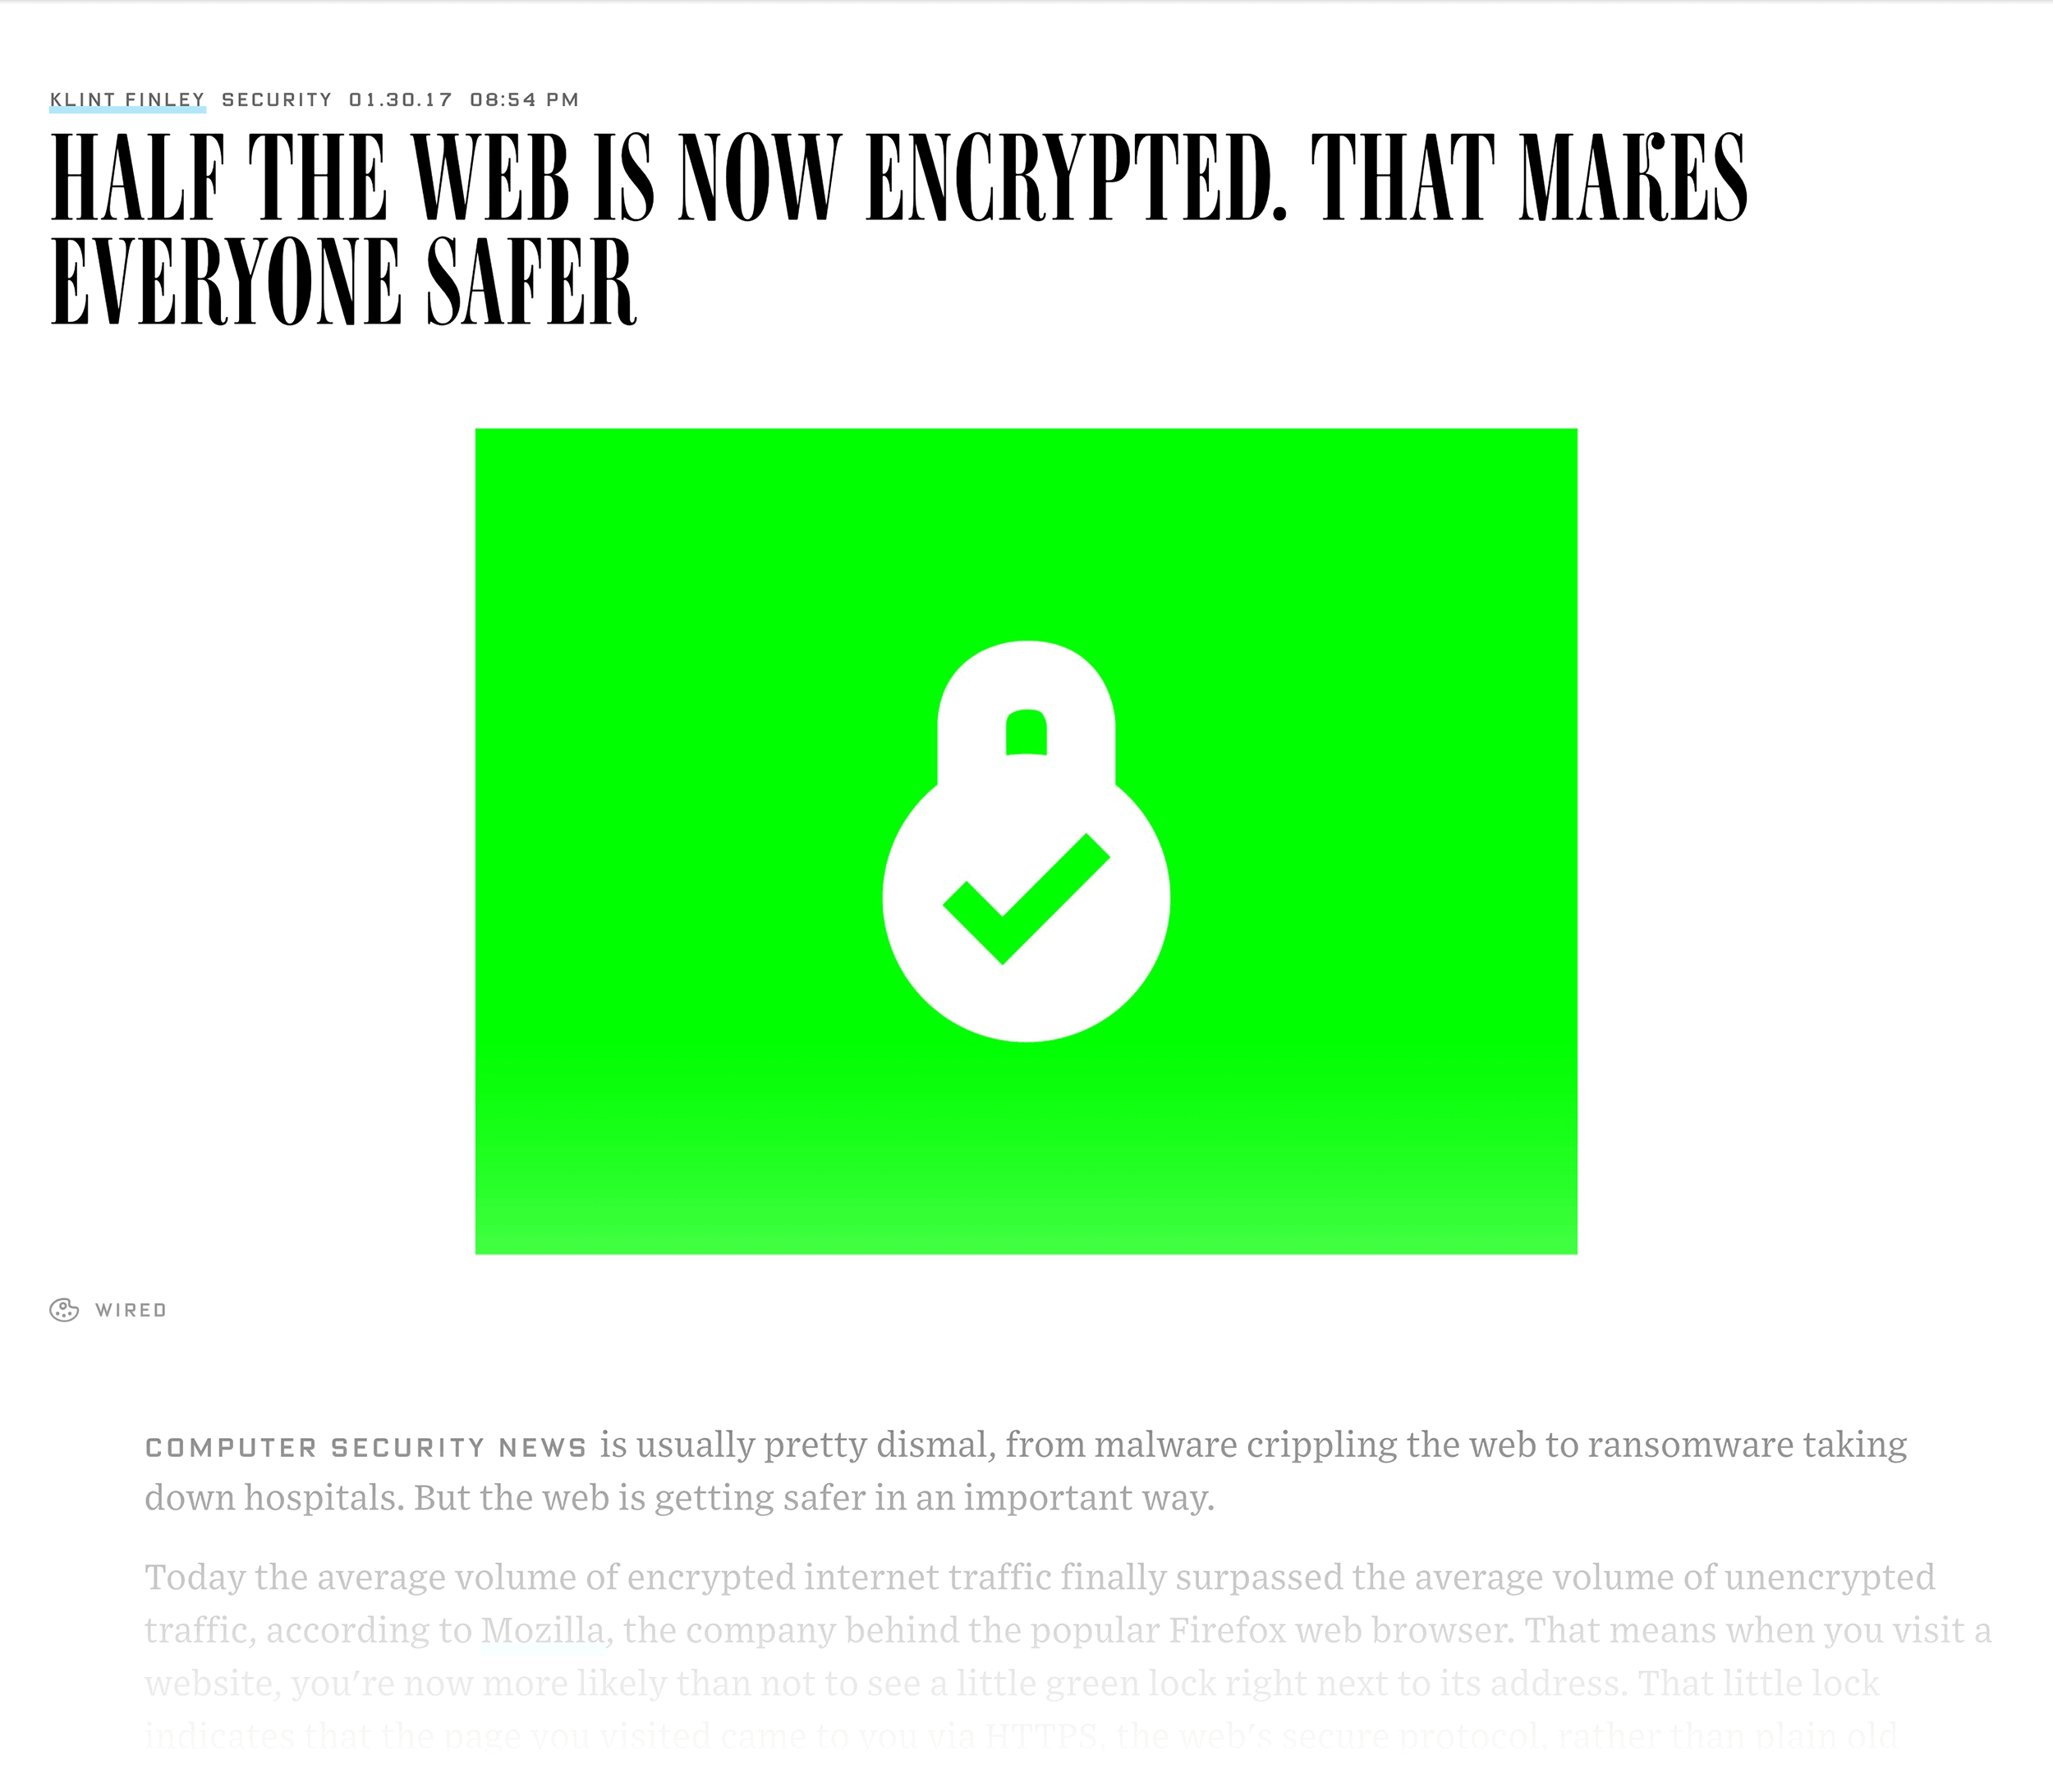 Half of the web uses HTTPS